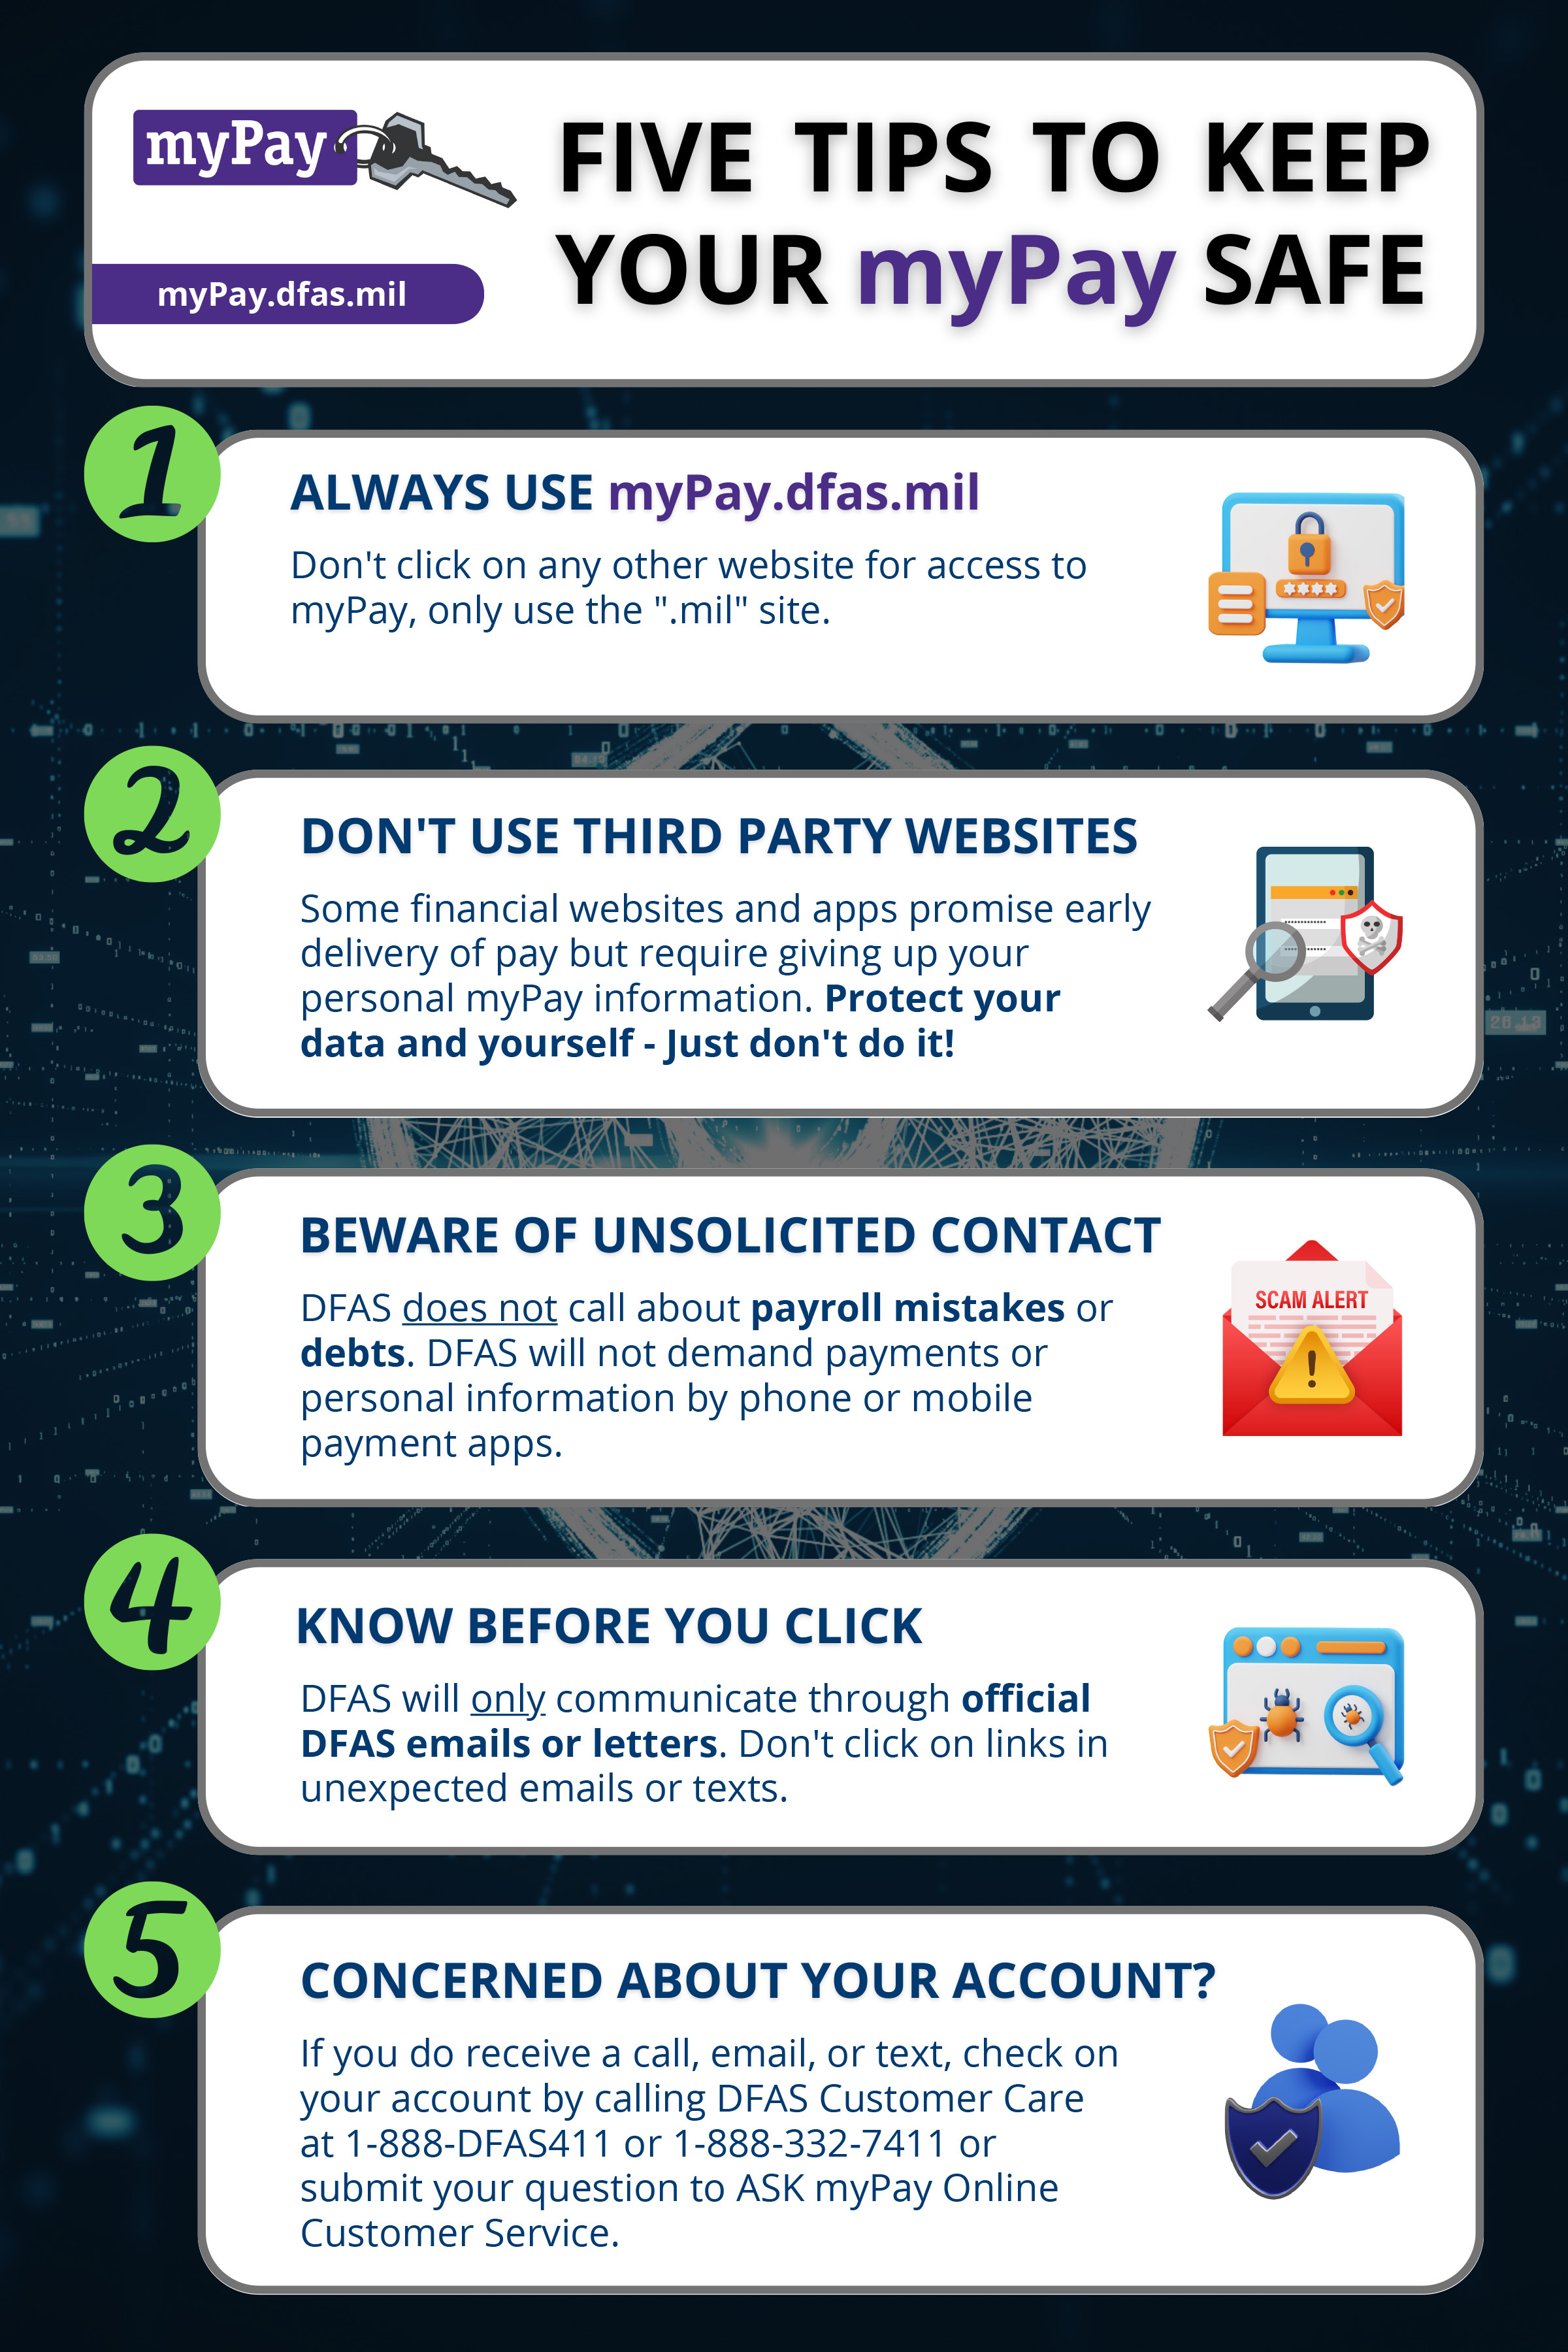 Infographic: 5 Tips To Keep Your myPay Safe. 1. Always use myPay.dfas.mil. Don't click on any other website for access to myPay, only use the ".mil" site. 2. Don't use third party websites. Some financial websites and apps promise early delivery of pay but require giving up your myPay information. Protect your data and yourself just don't do it. 3. Beware of unsolicited contact. DFAS does not call about payroll mistakes or debts. DFAS will not demand payments or personal information by phone or mobile payment apps. 4. Know before you click. DFAS will only communicate through official DFAS emails or letters. Don't click on links in unexpected emails or texts. 5. Concerned about your account? If you do receive a call, email, or text, check on your account by calling DFAS customer Care at 1-888-DFAS411 or 1-888-332-7411 or submit your question to ASK myPay Online Customer Service